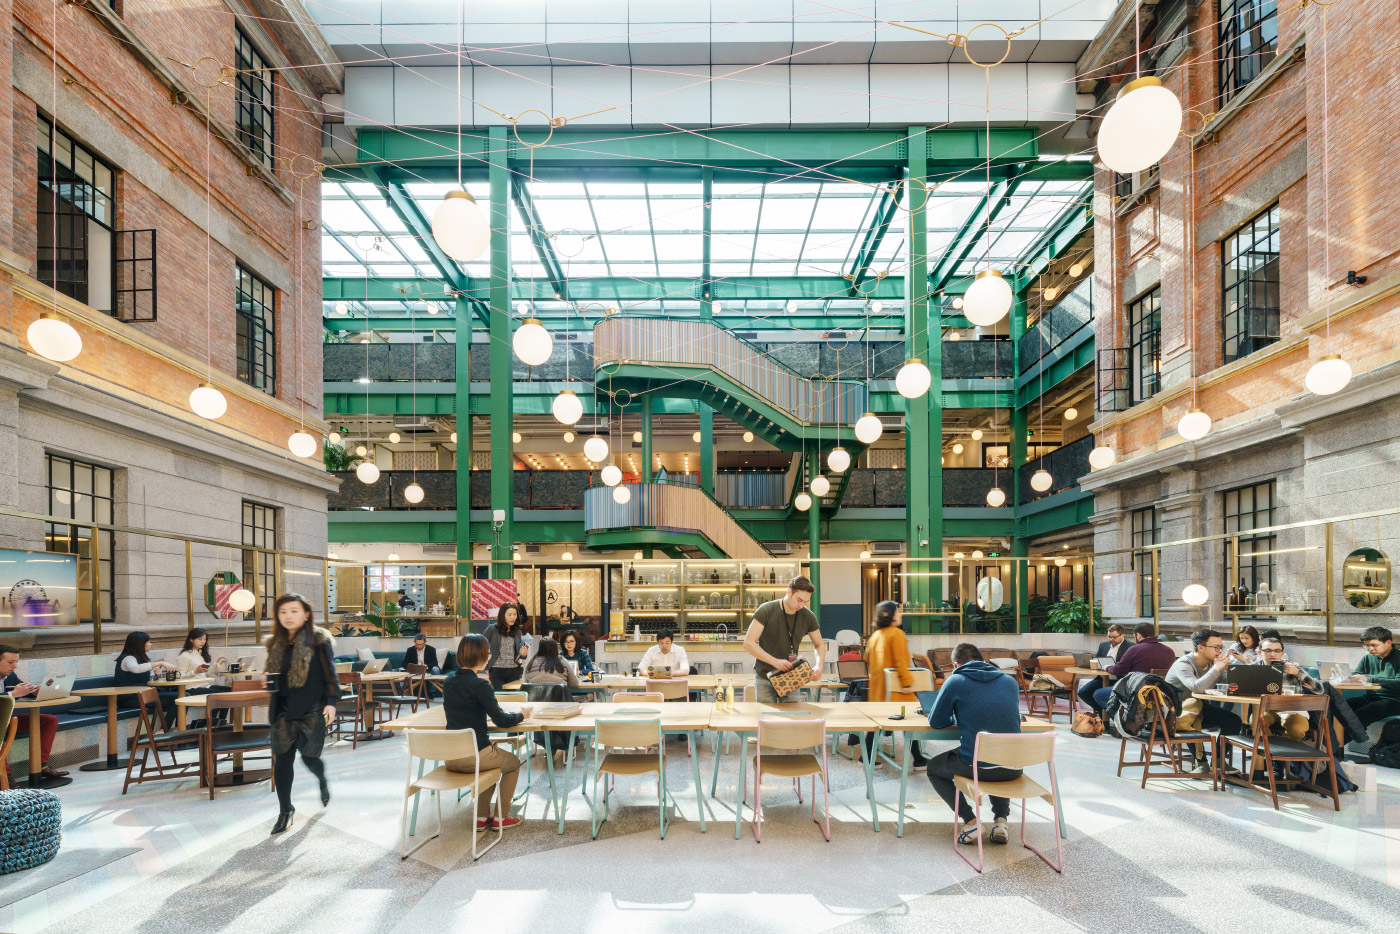 Photo of a common atrium bounded by brick buildings and covered with a green skylight